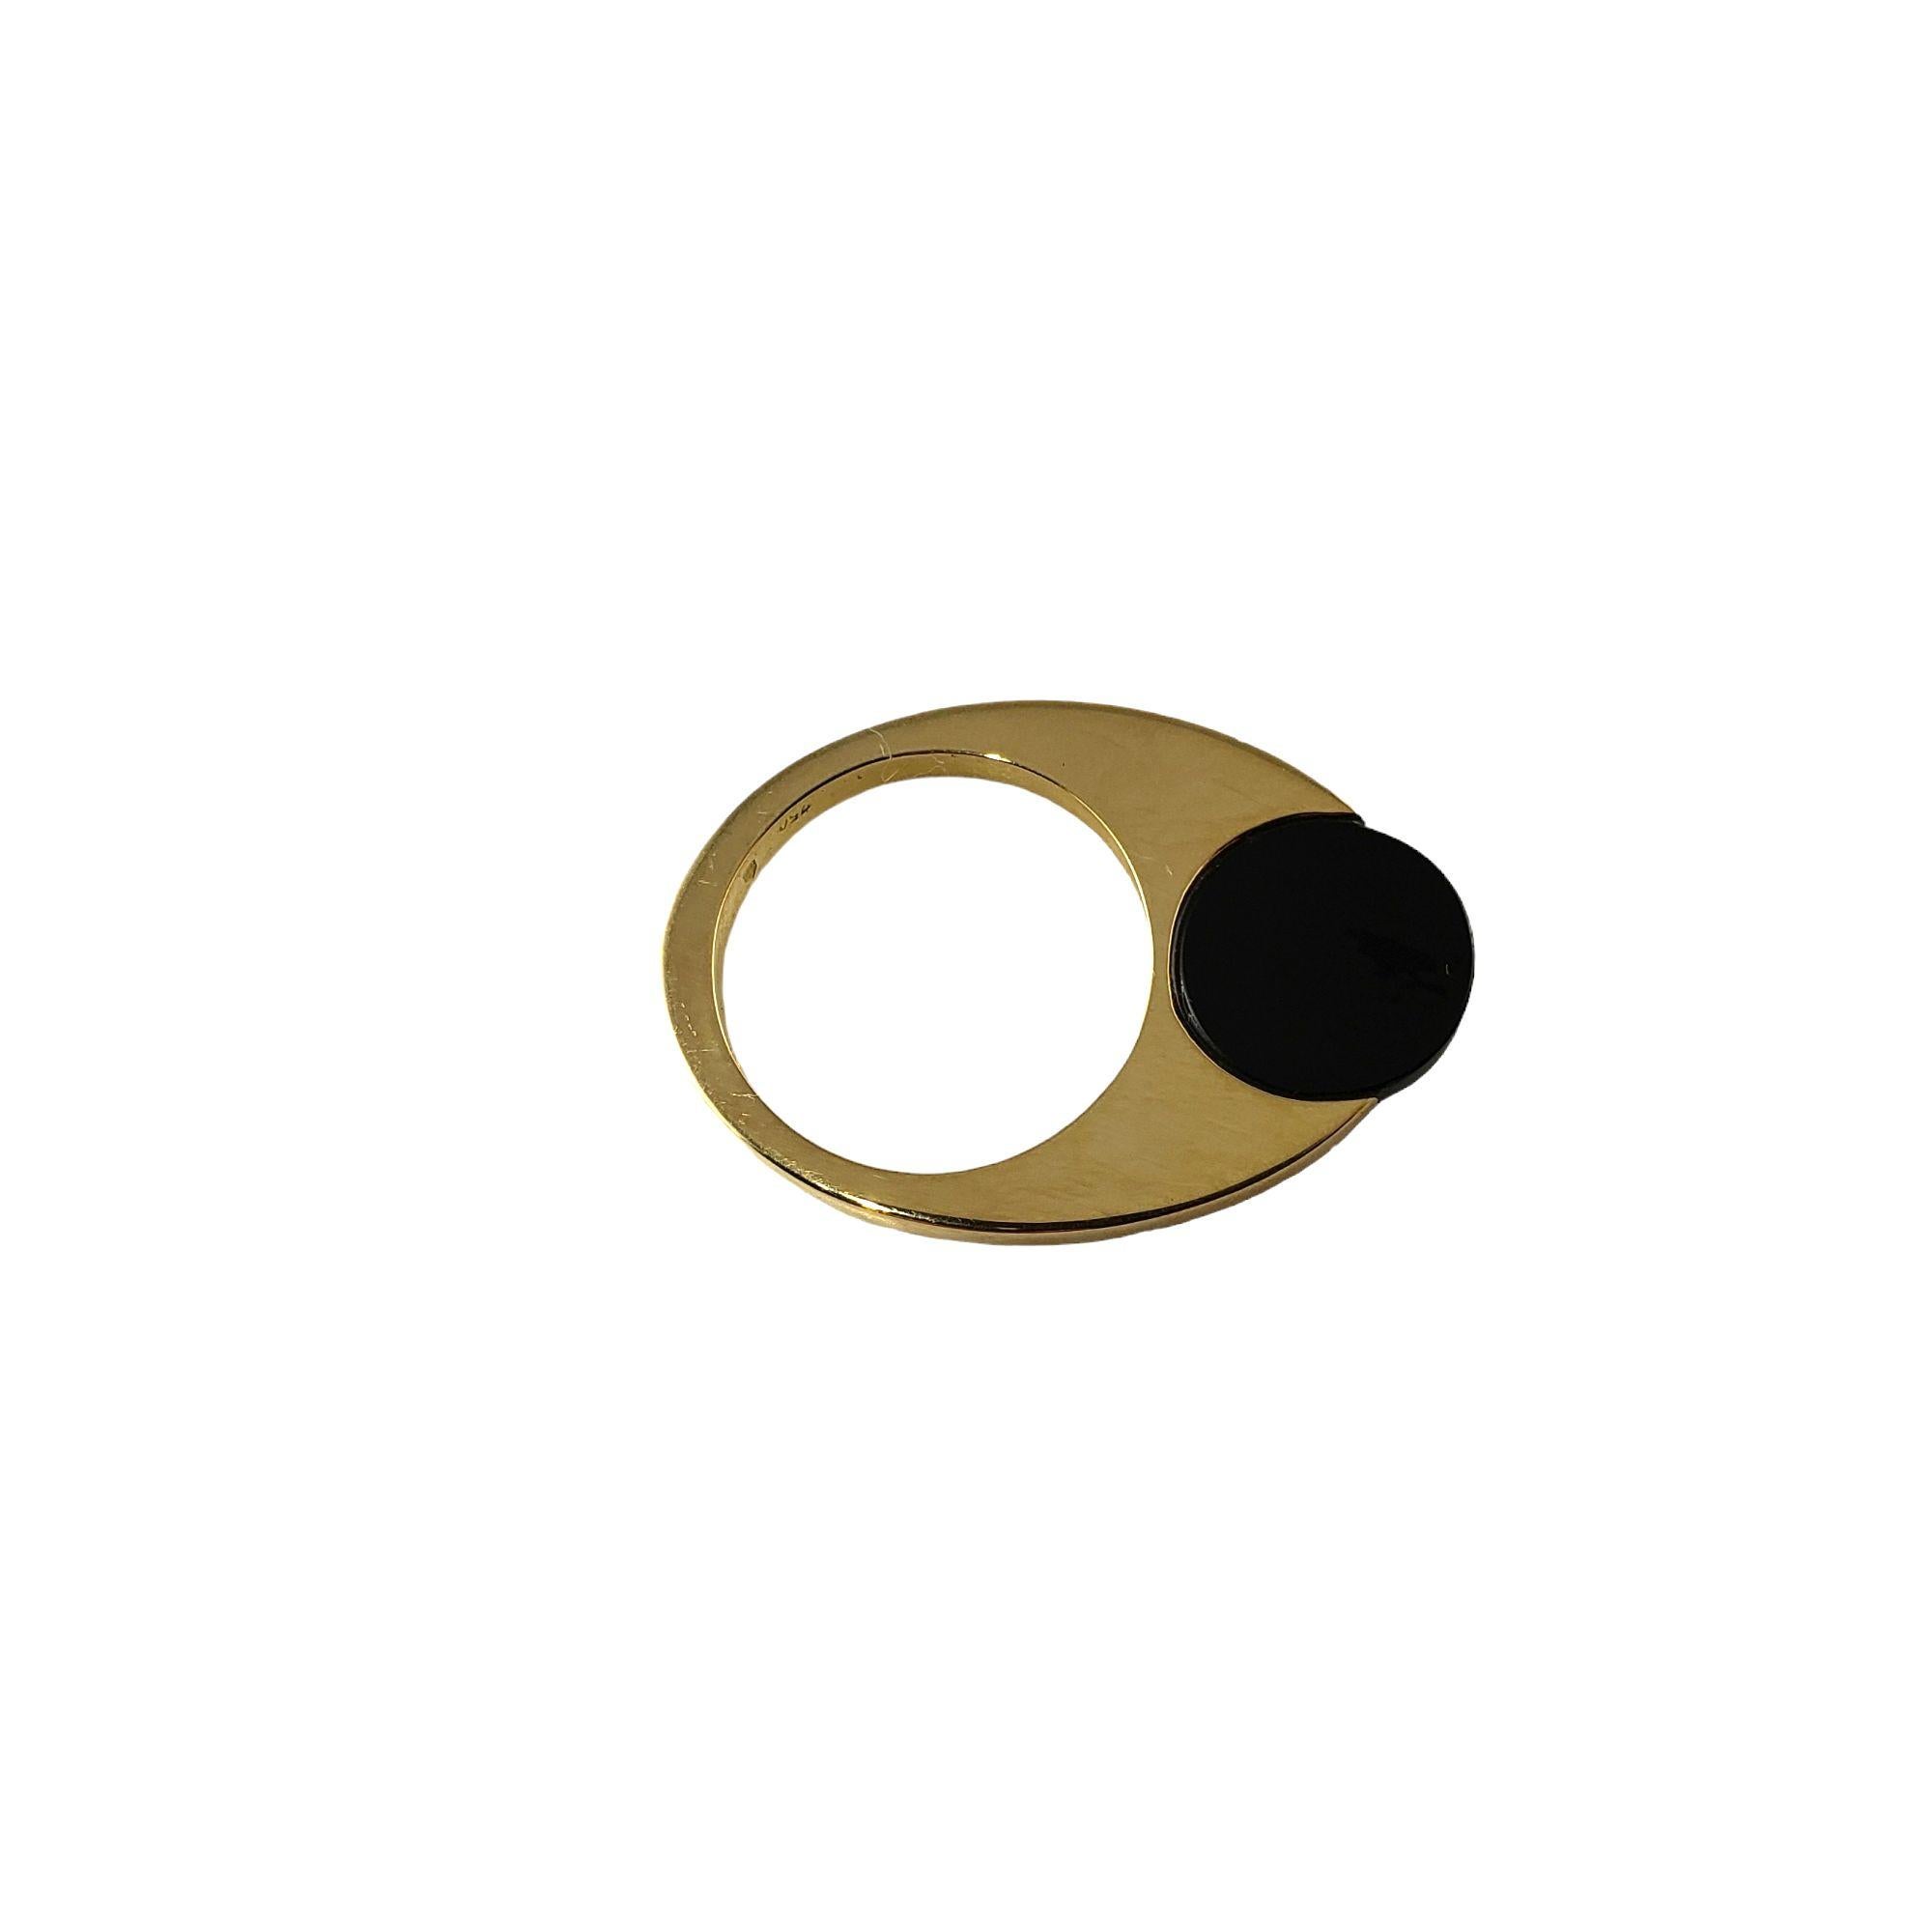 Round Cut Pierre Cardin 18 Karat Yellow Gold and Onyx Ring Size 6